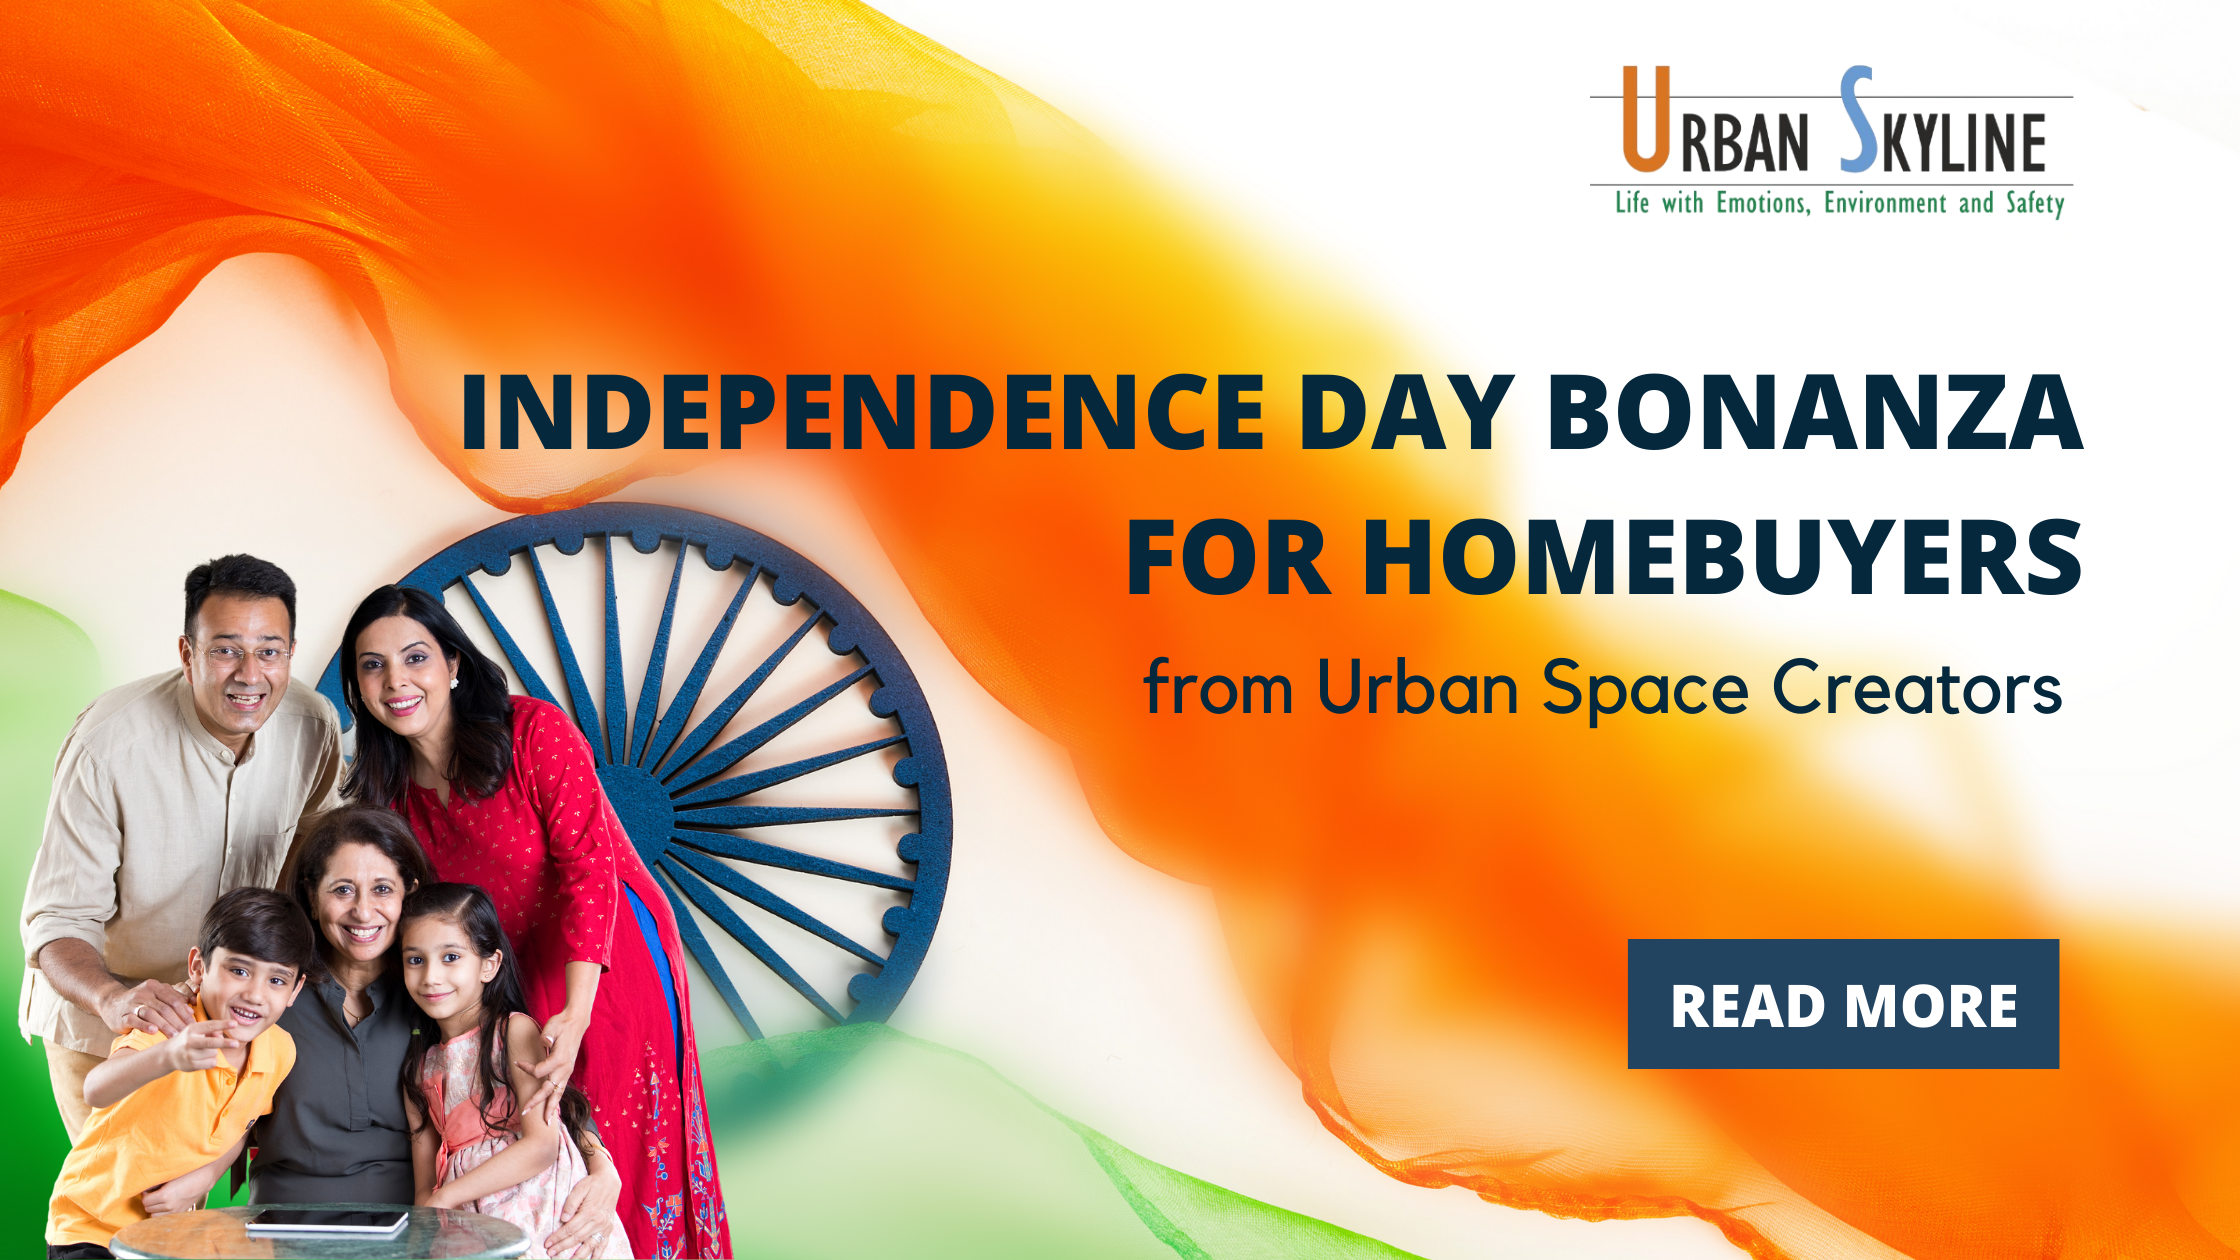 Independence Day bonanza for homebuyers from Urban Space Creators